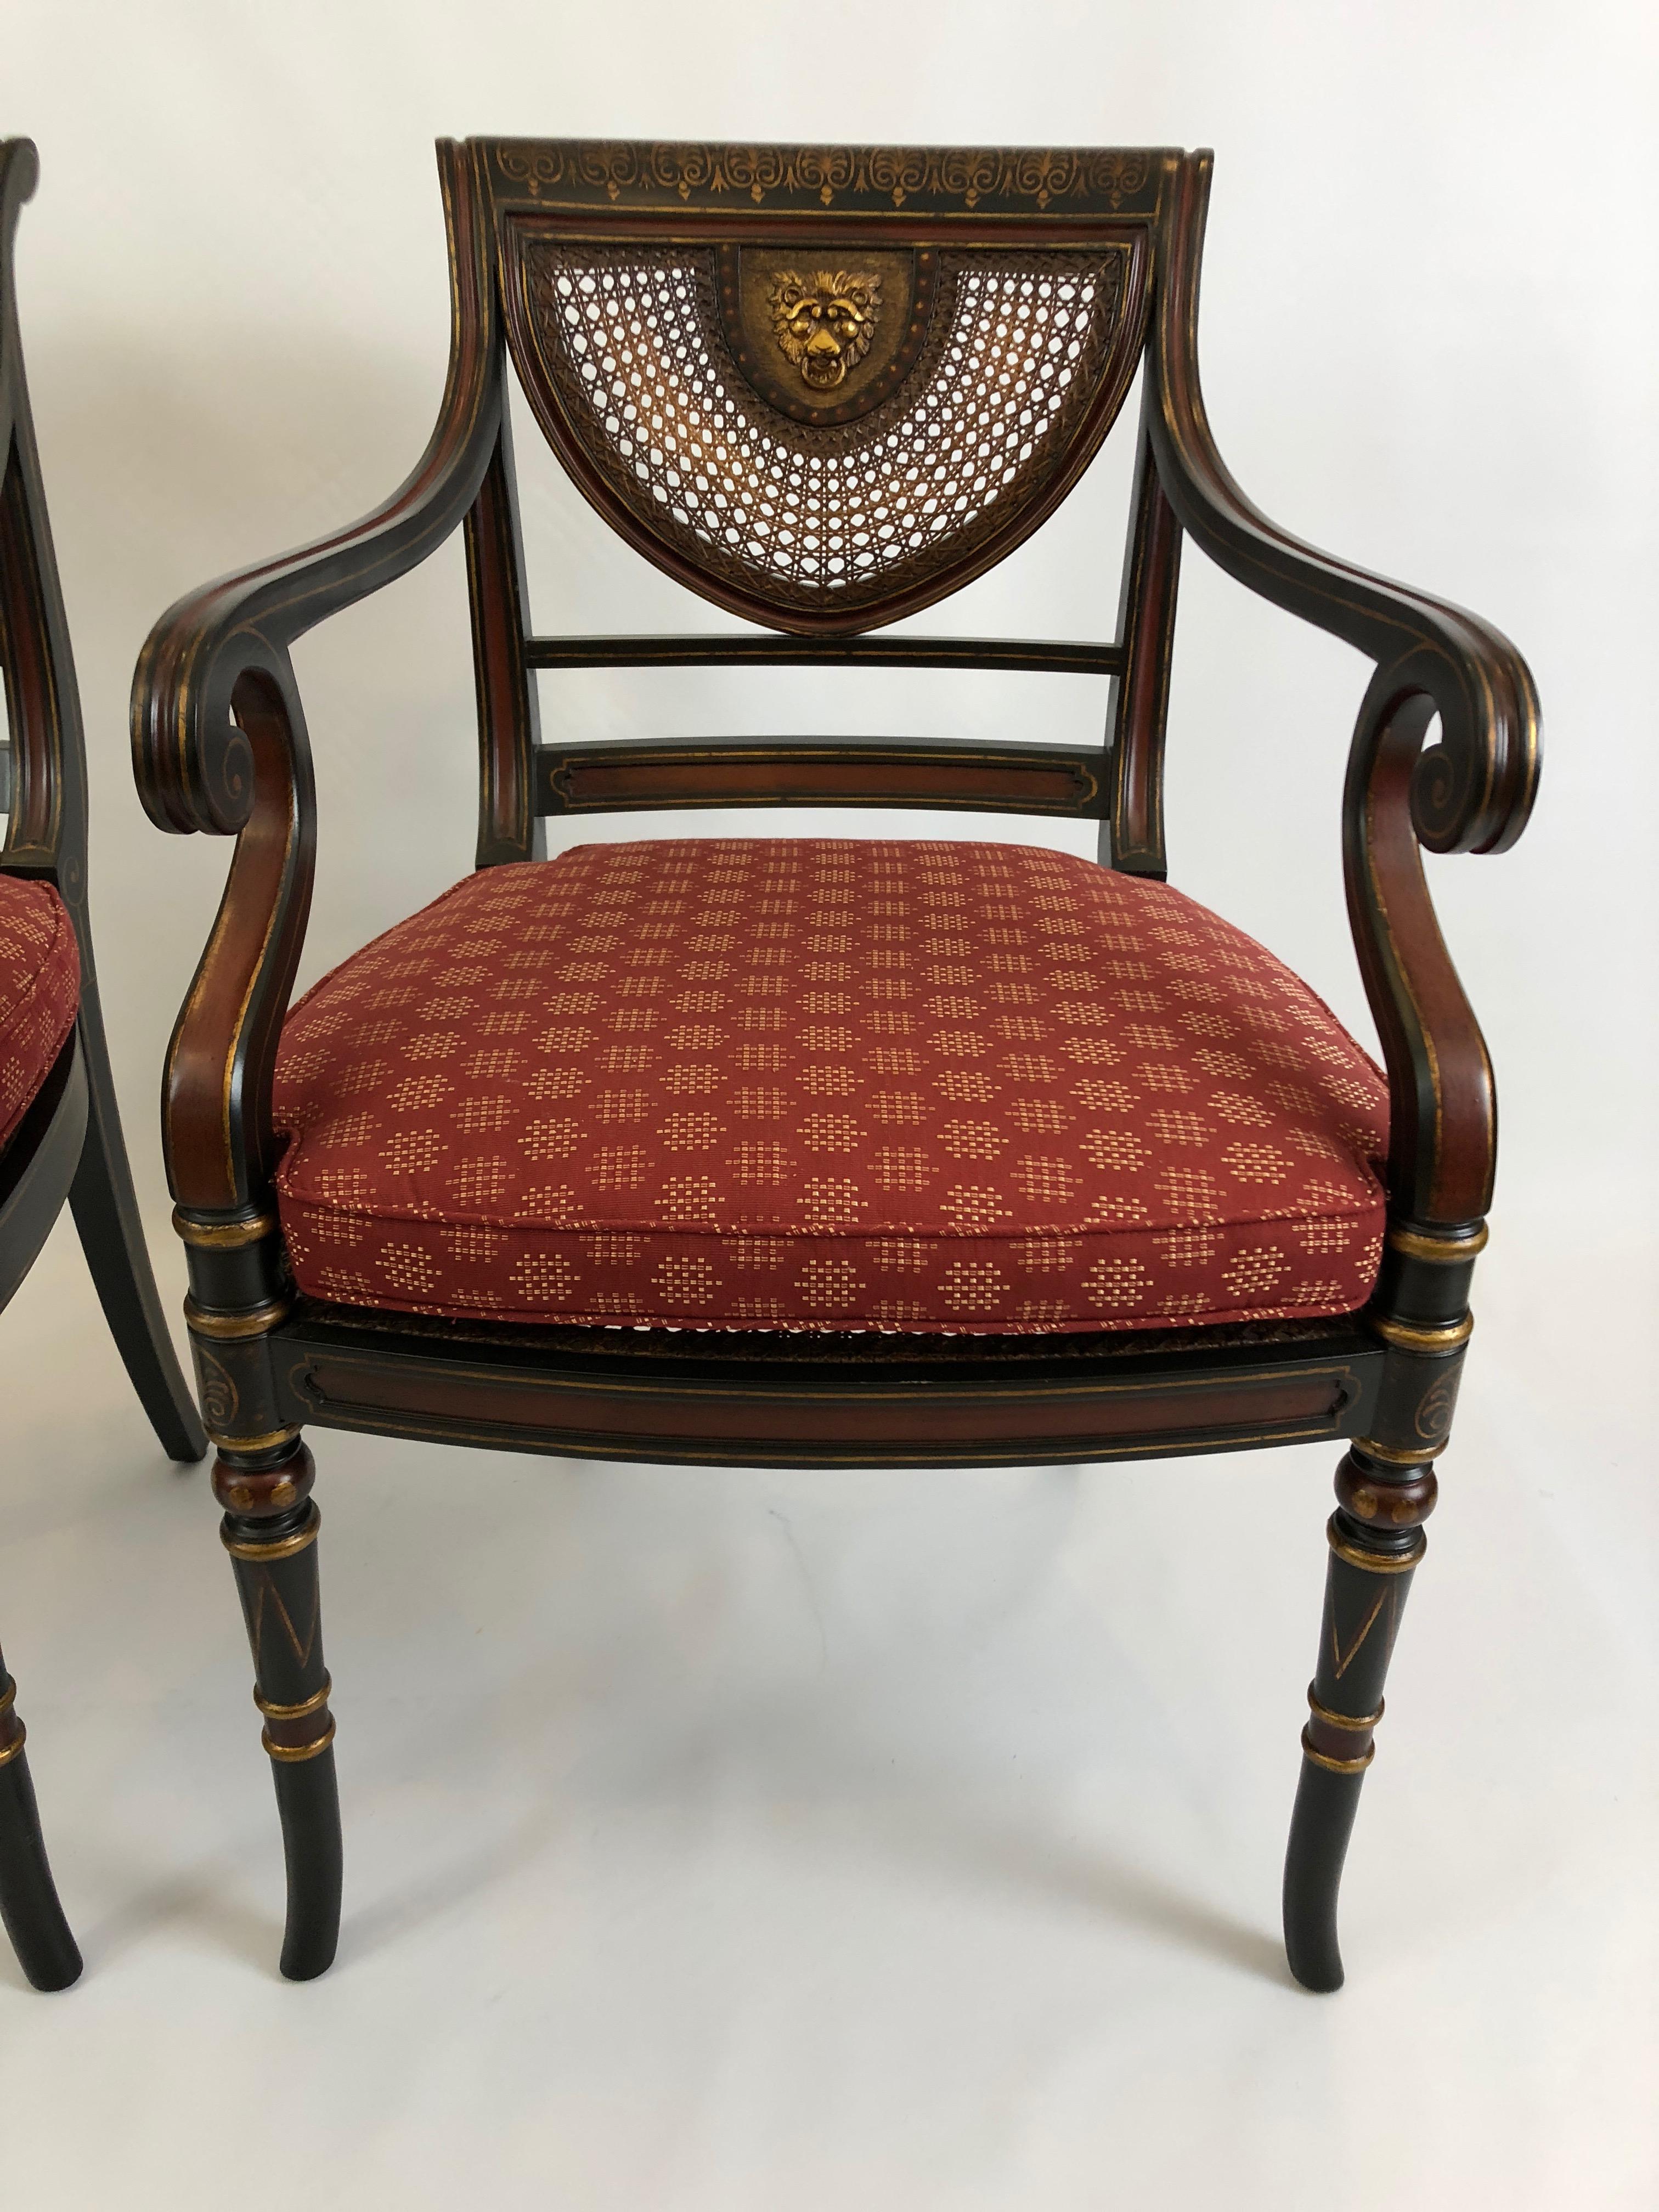 Beautifully designed elegant arm chairs having black, red and gold color palette with stunning caned half moon shapes on the backs that surround a gorgeous gilded lion's face. The seat is also caned, and comes with custom cushions.
Arm height 28